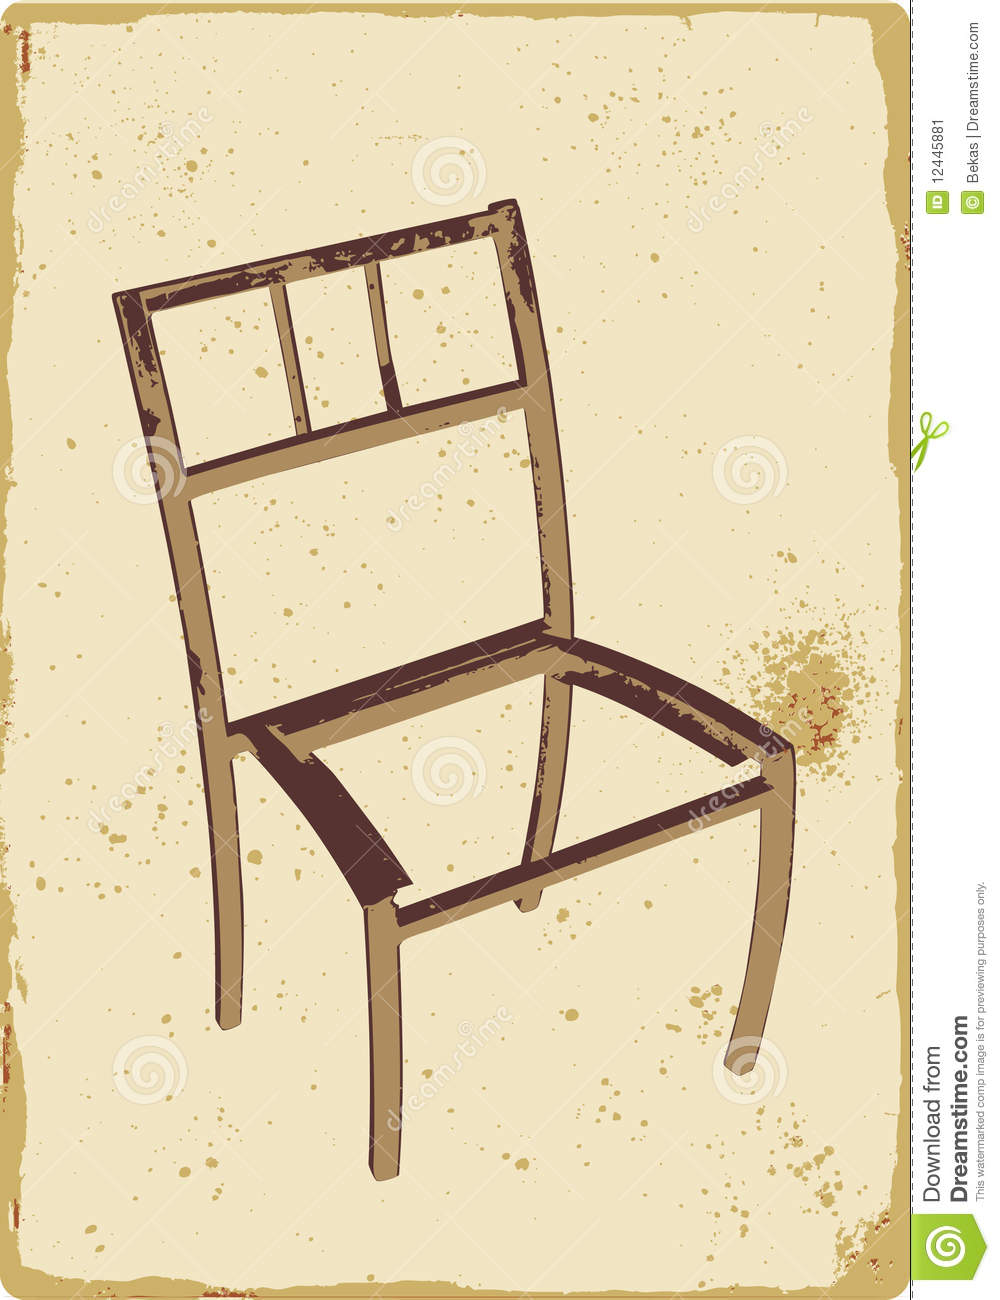 Old Broken Chair Stock Image   Image  12445881